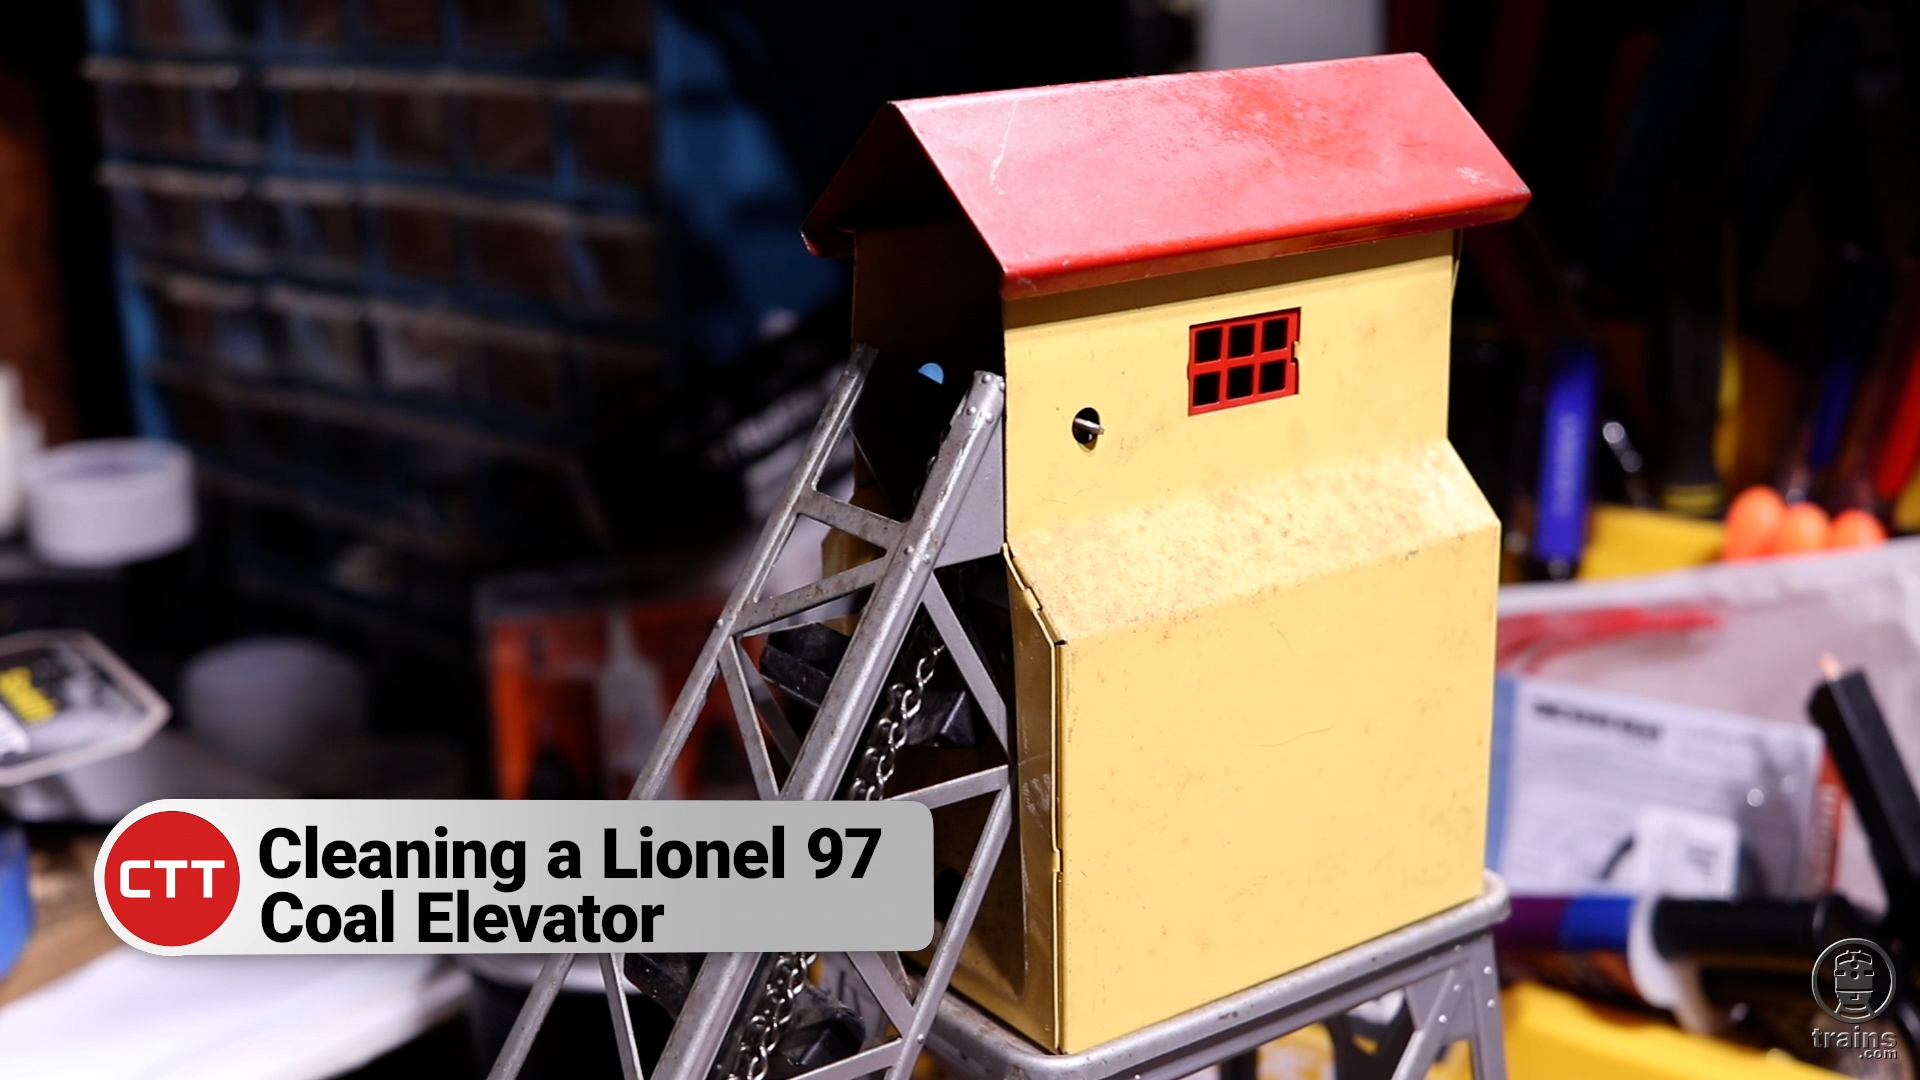 Cleaning up Lionel’s no. 97 Coal Elevator